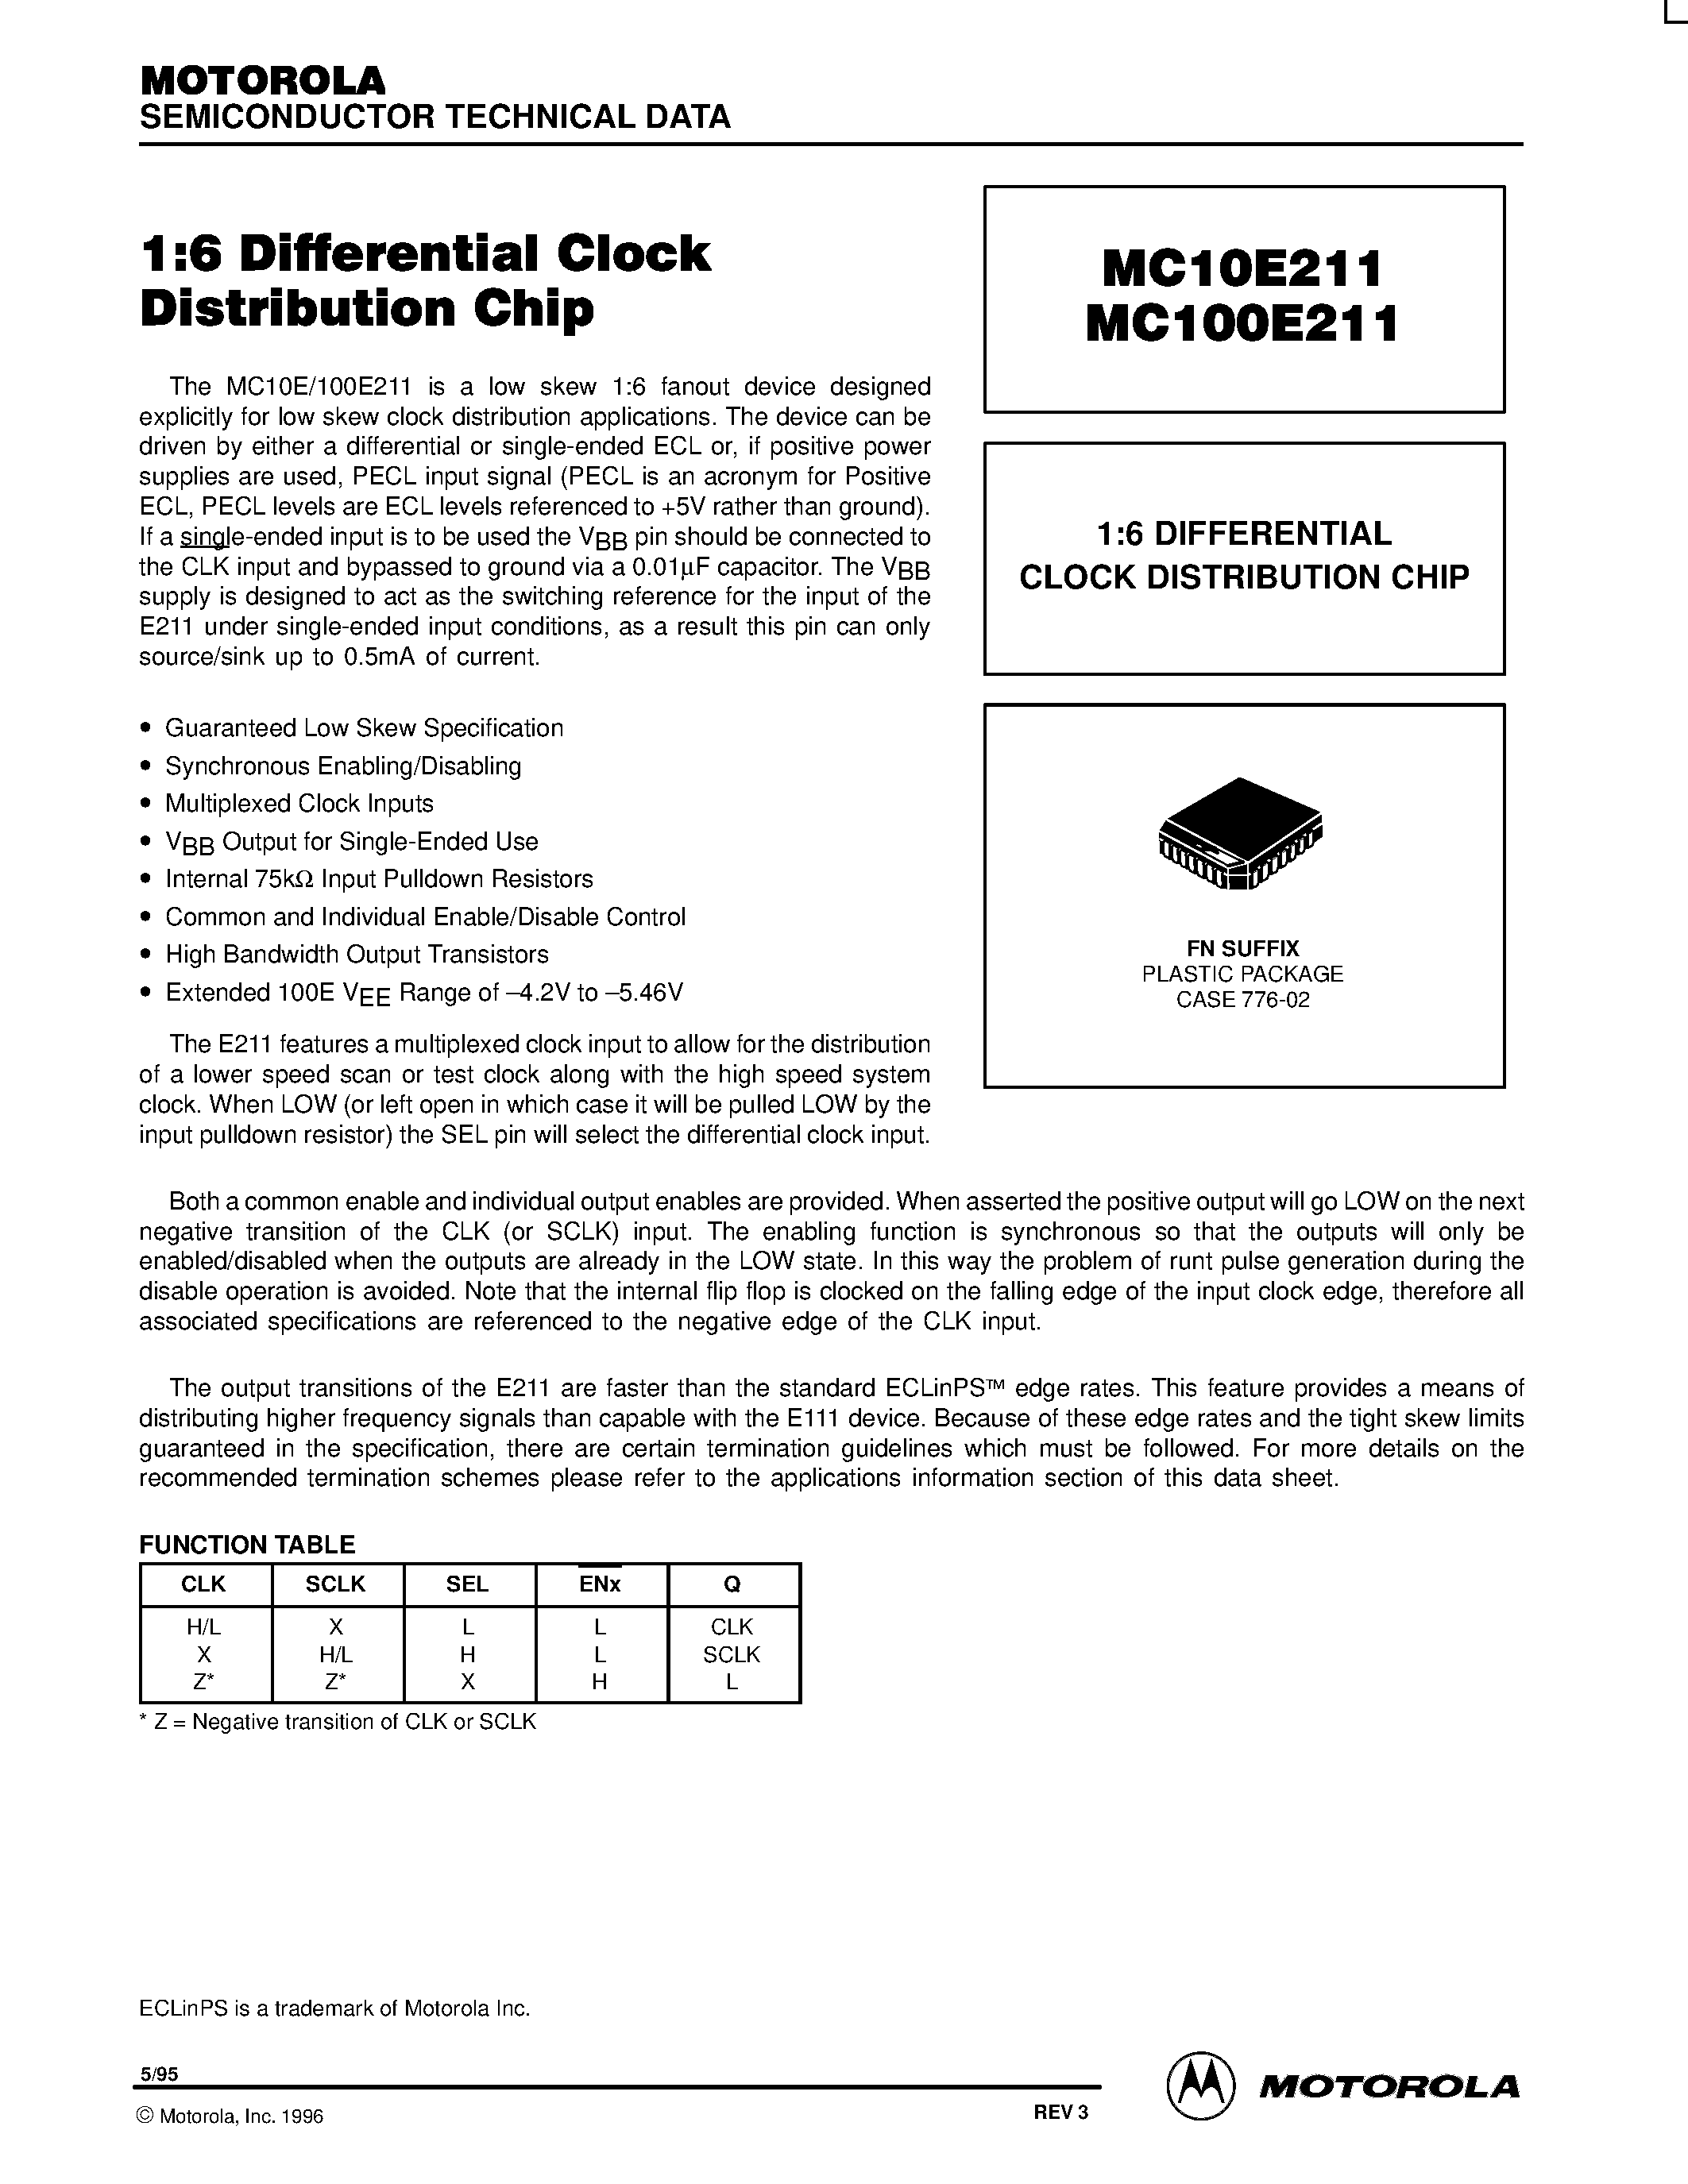 Datasheet MC100E211FN - 1:6 DIFFERENTIAL CLOCK DISTRIBUTION CHIP page 1